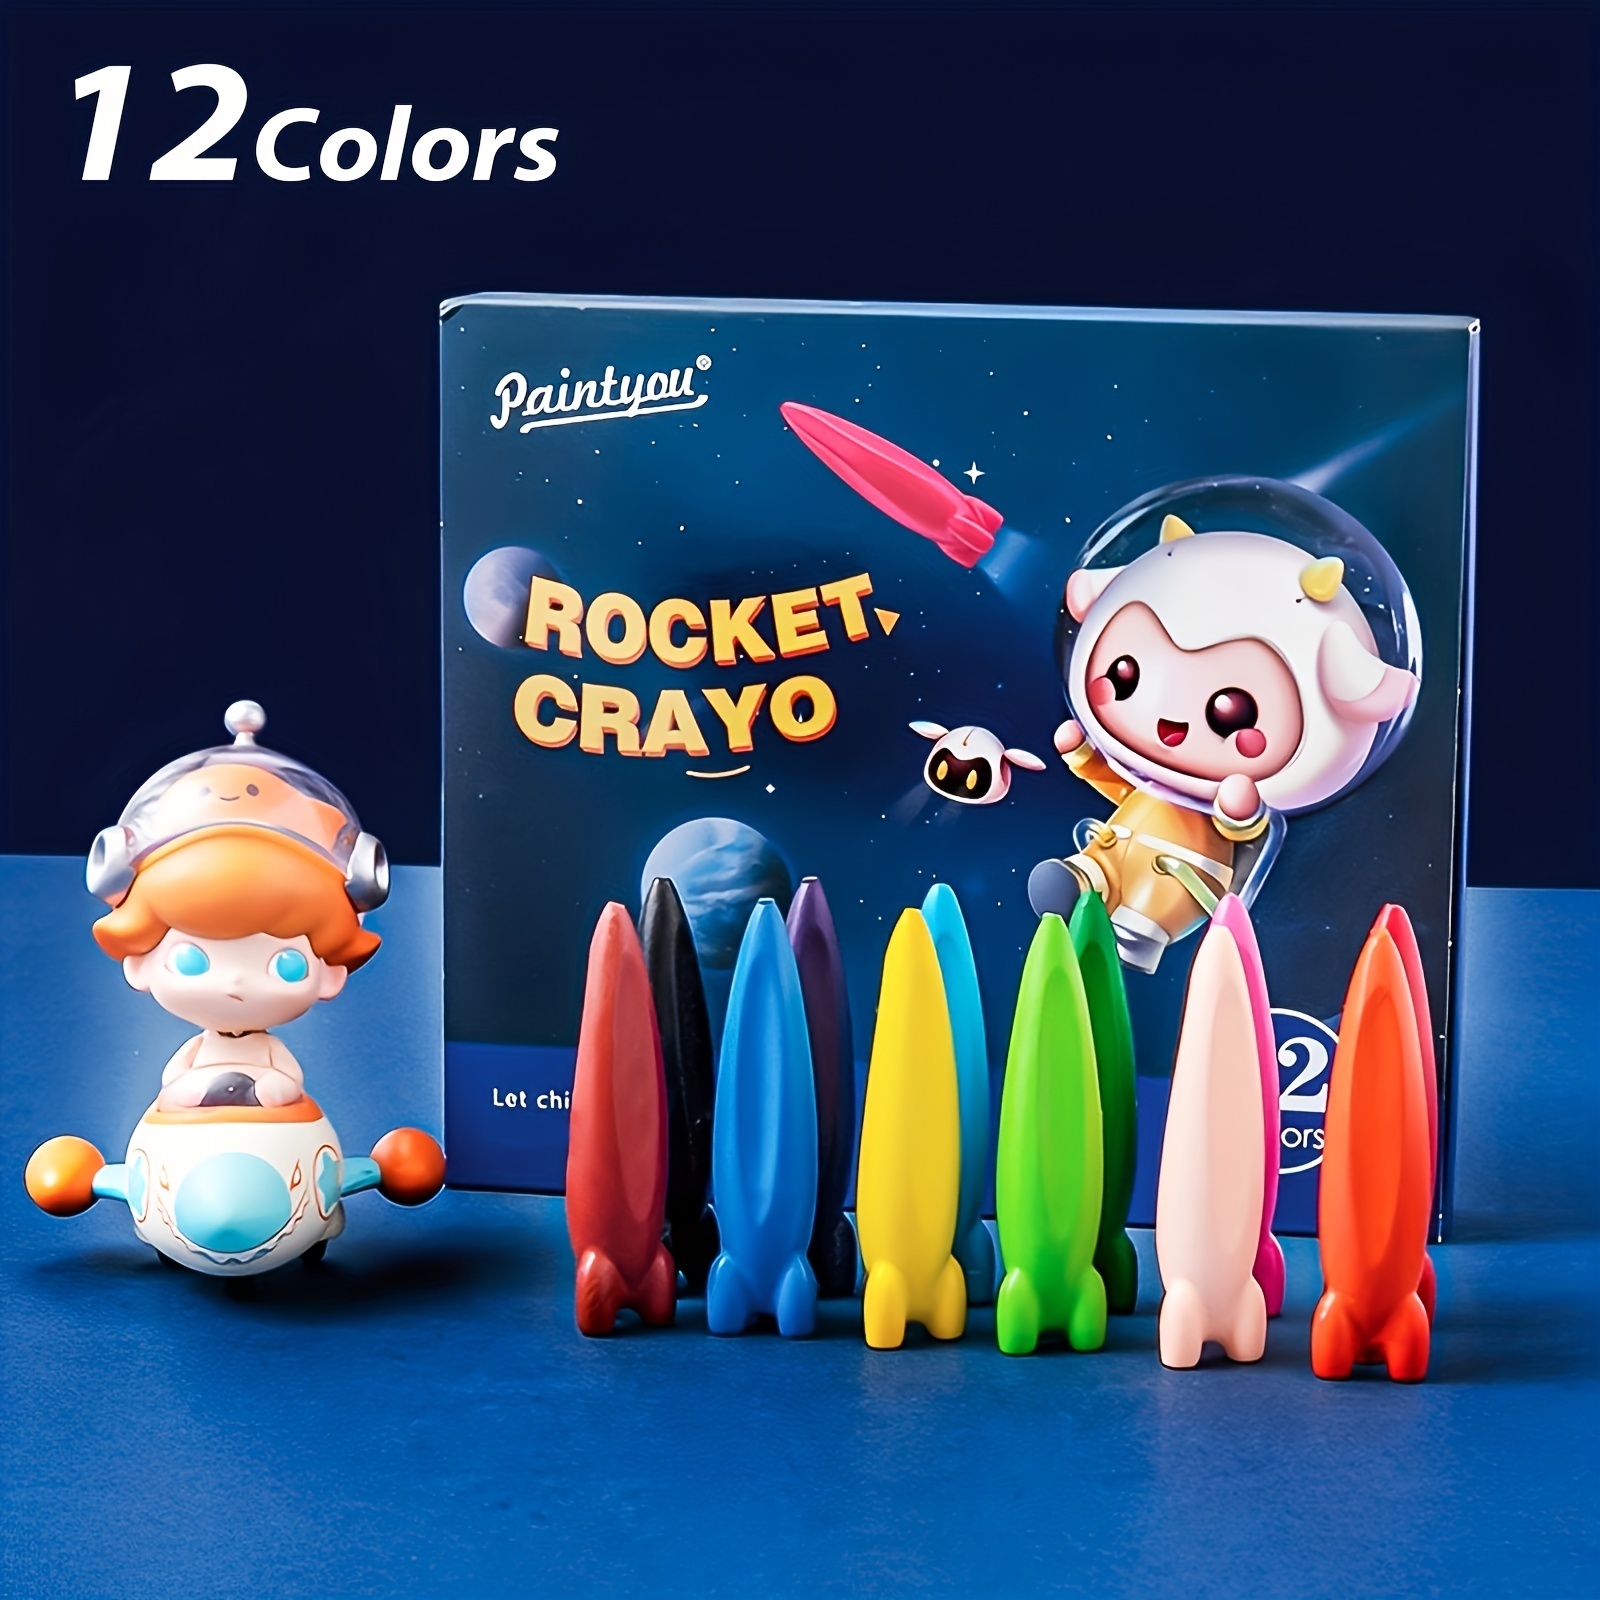 24pcs Peanut Crayons For Students, Colorful Washable Toddler Crayons,  Non-Toxic Students' Crayons For Ages 2-4, 1-3, 4-8, Coloring Art Supplies